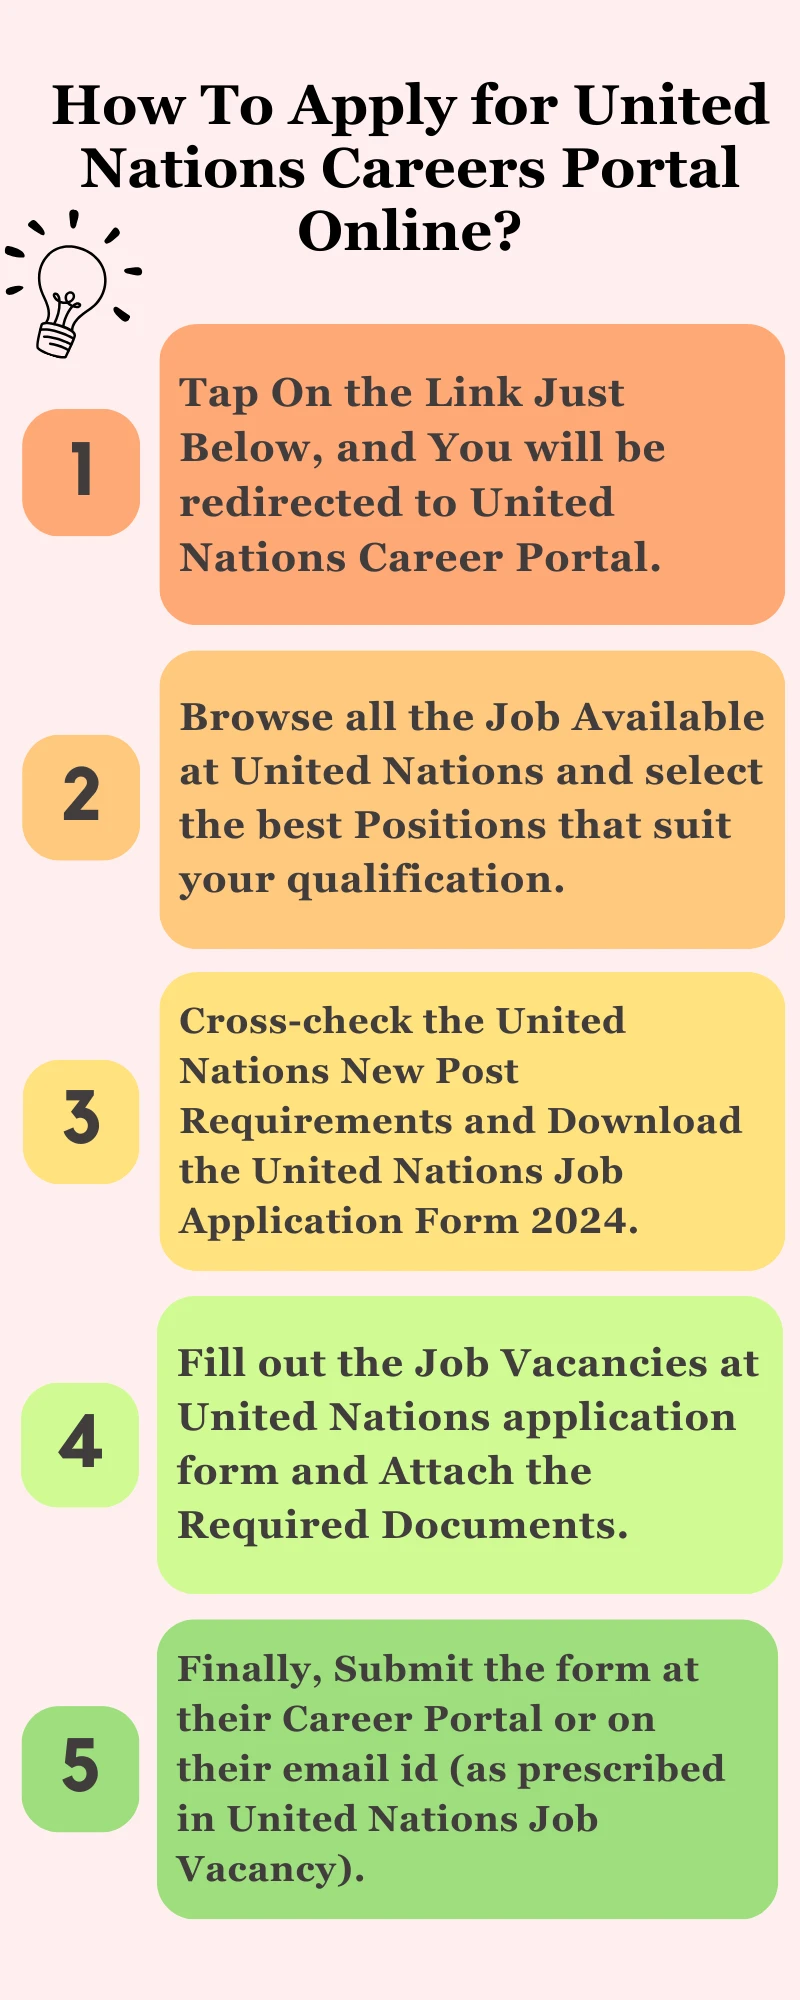 How To Apply for United Nations Careers Portal Online?